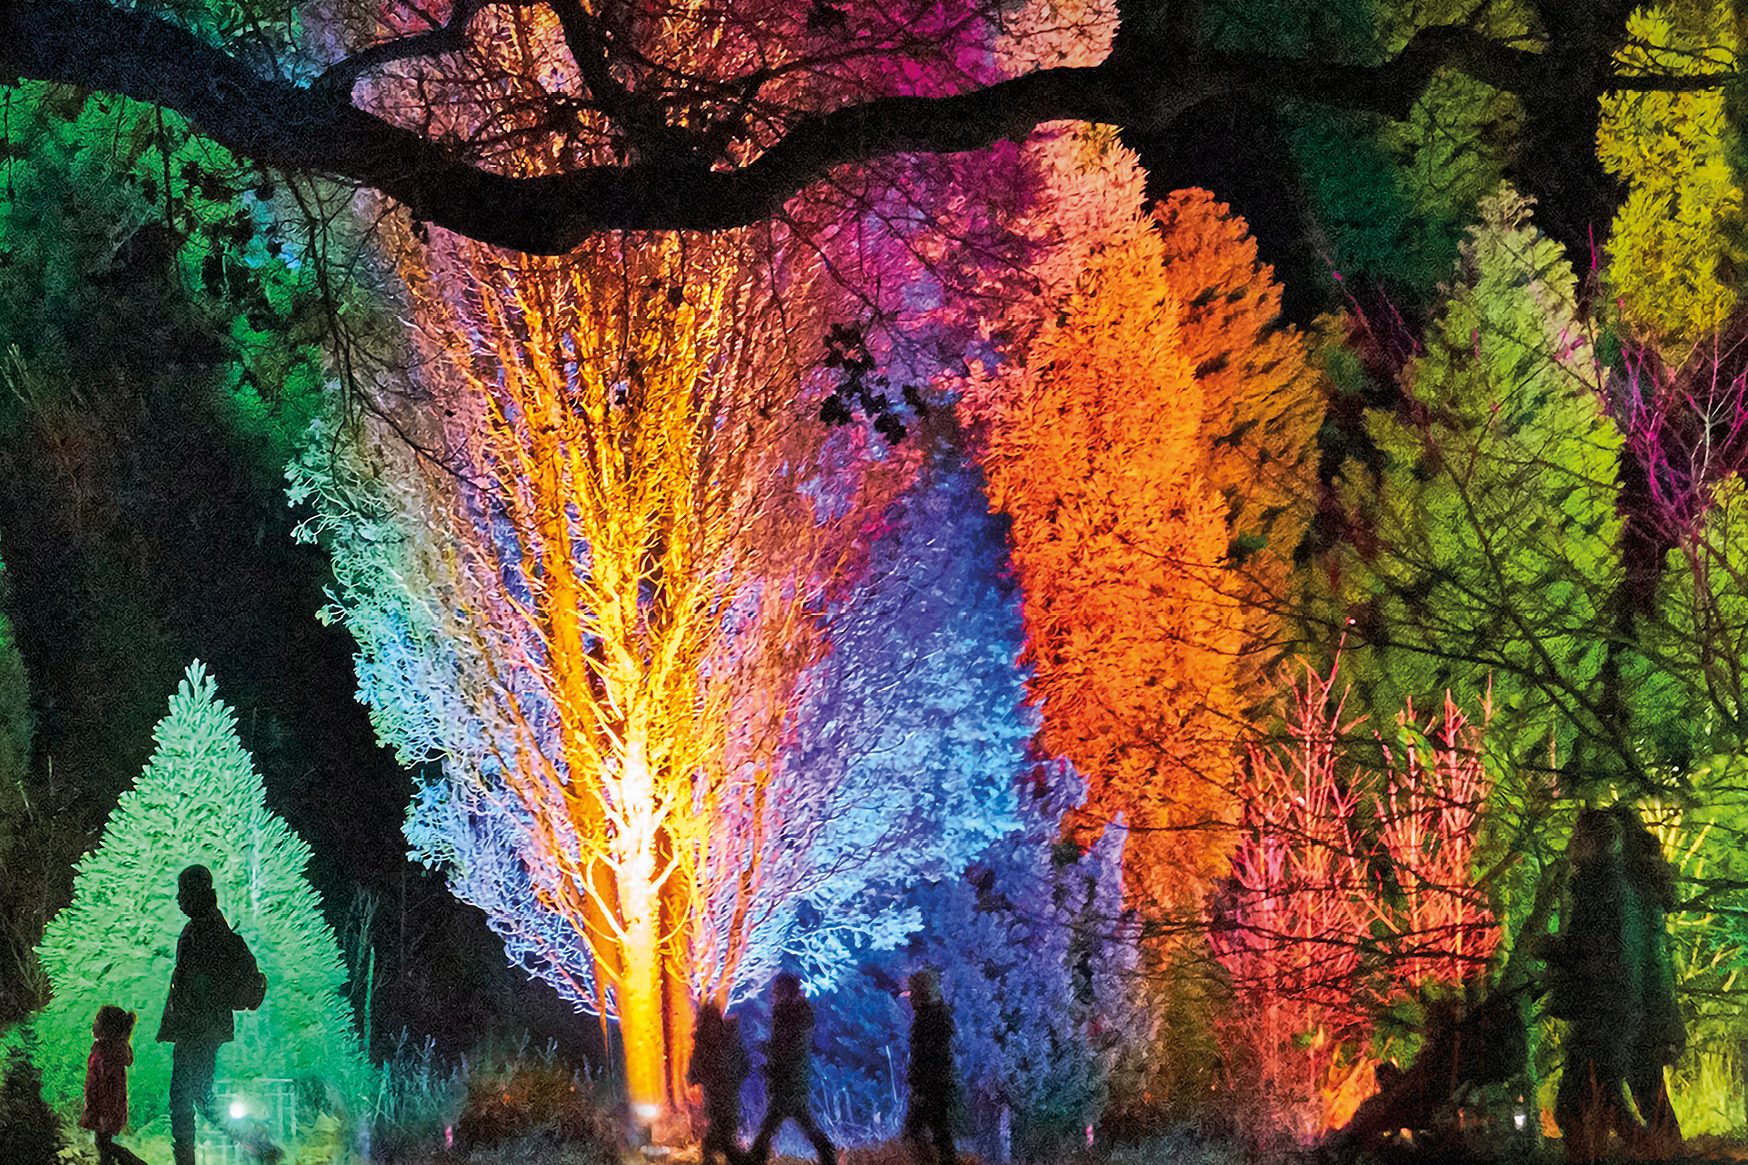 A vibrant light installation is taking over the Royal Botanic Gardens